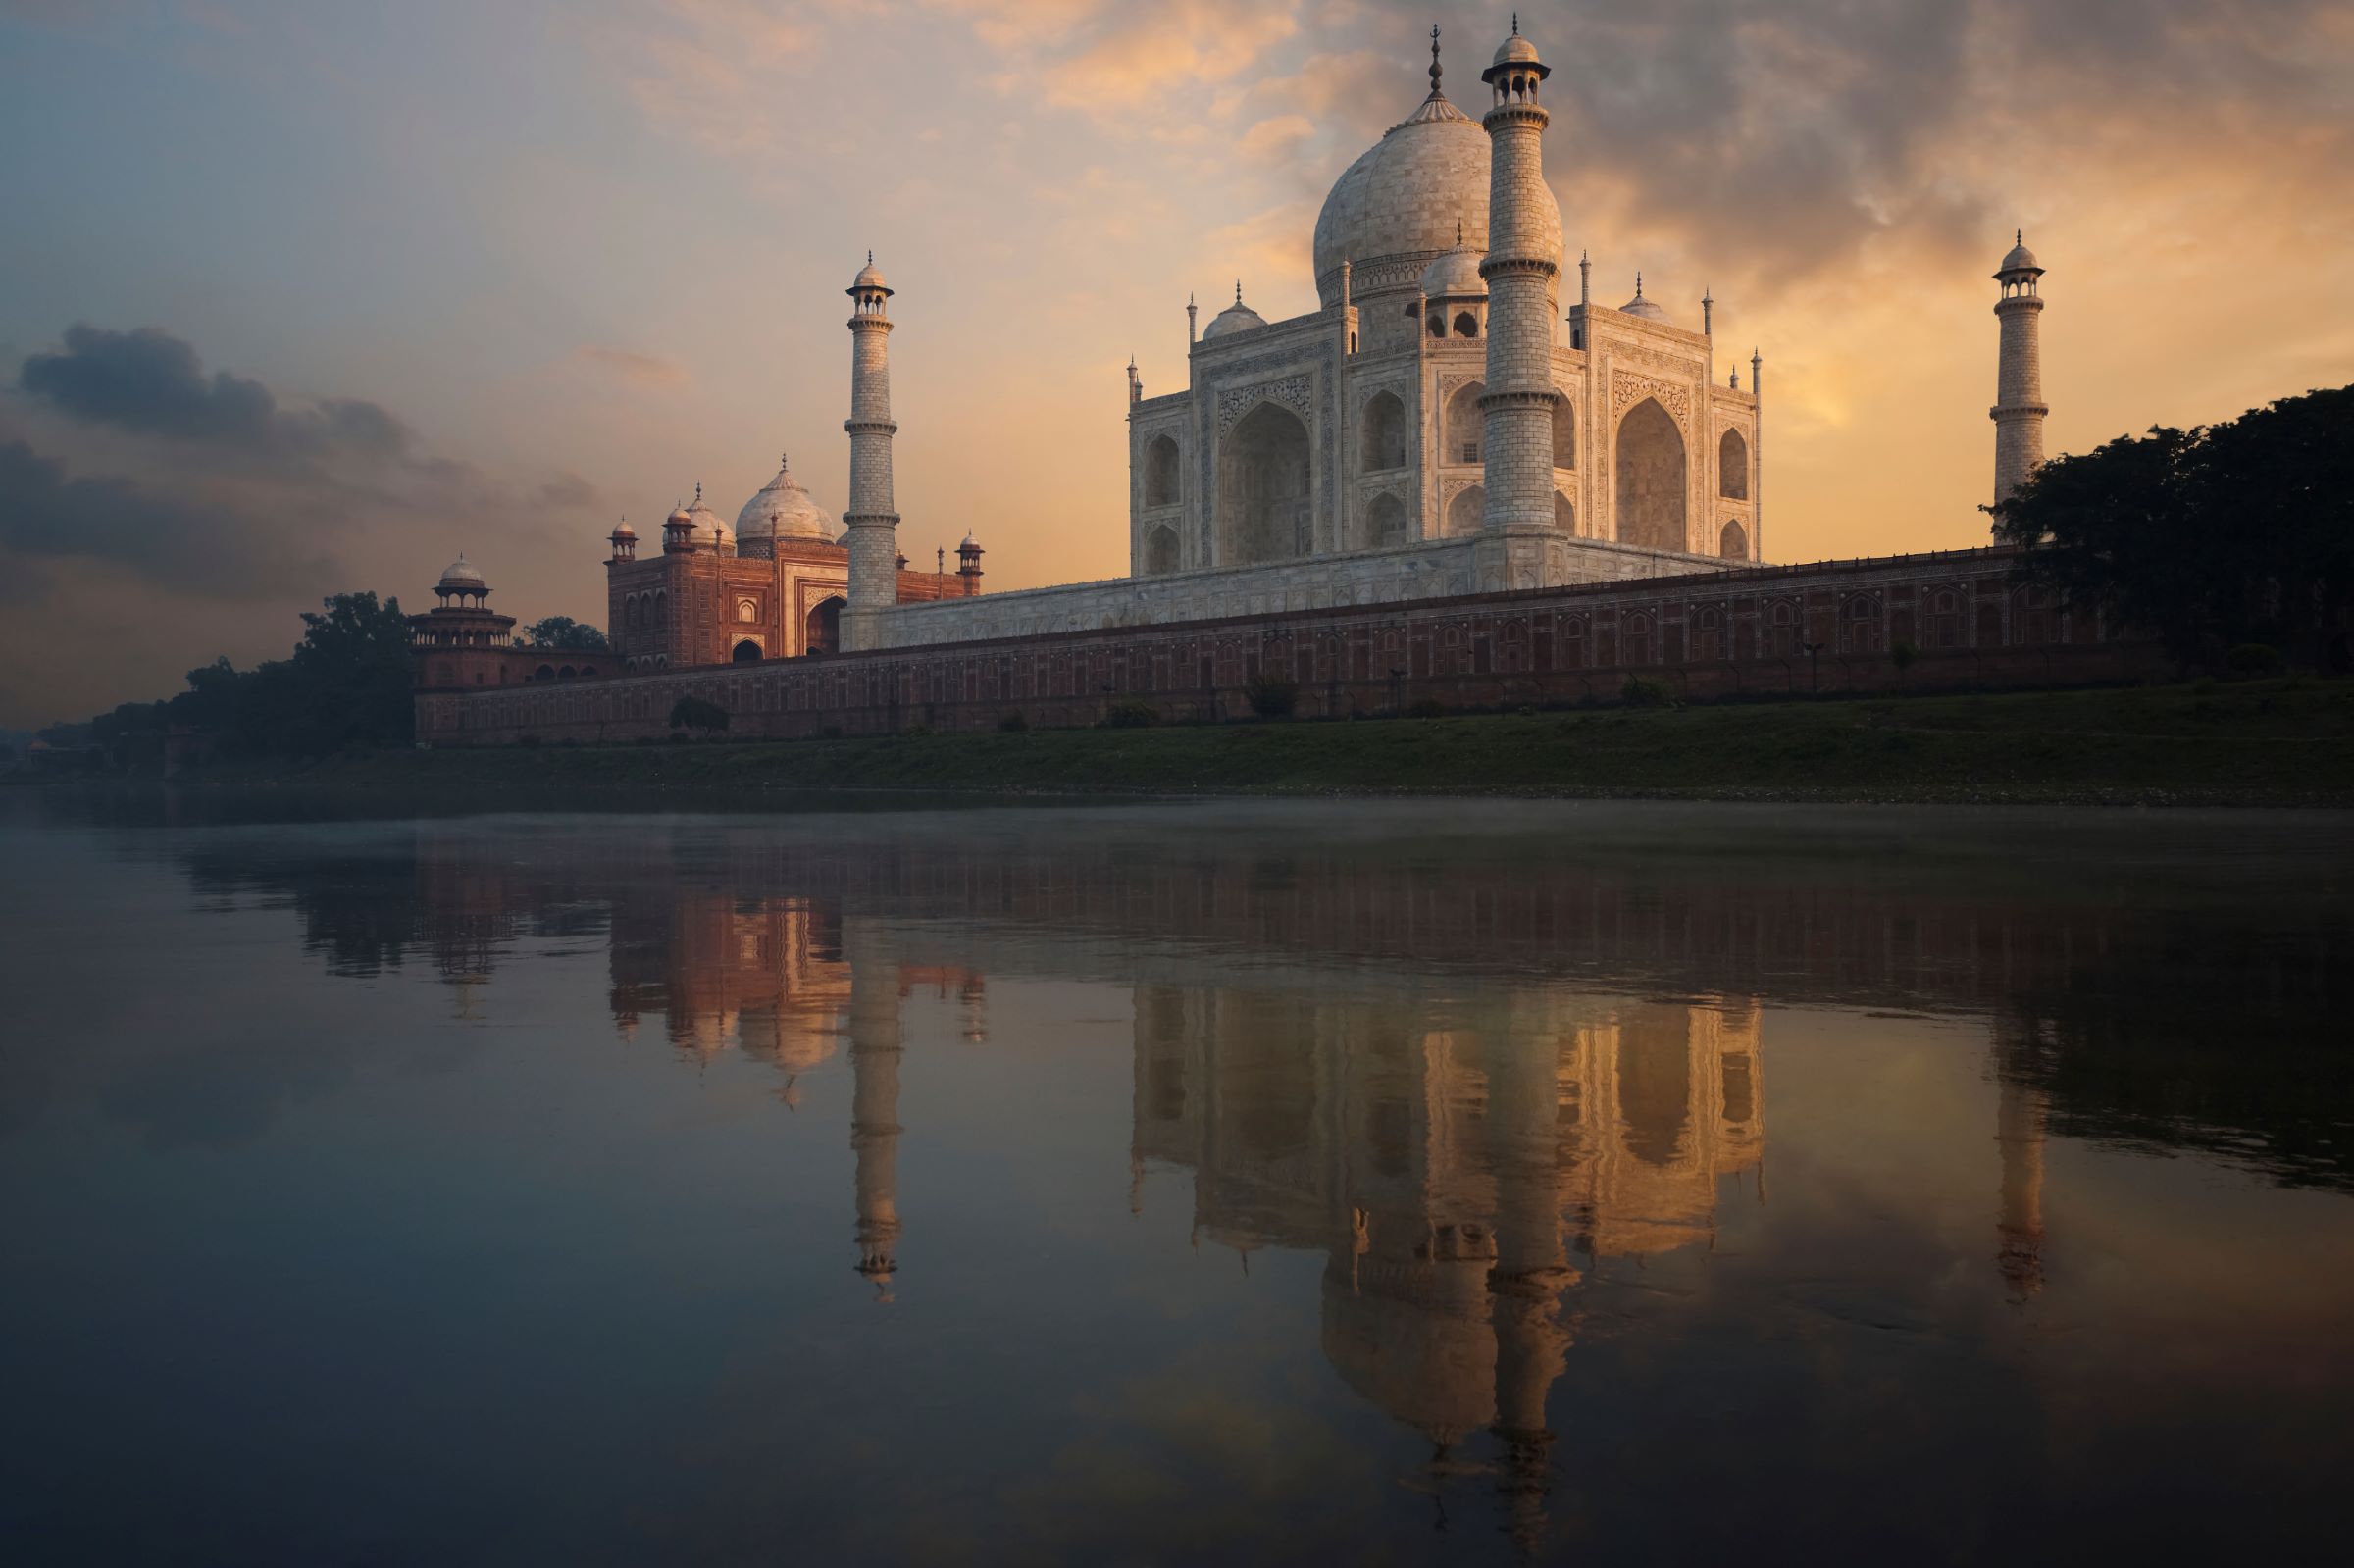 India Luxury Vacation - Travel to the Golden Triangle - Luxury India Travel - Taj Mahal Private Tour